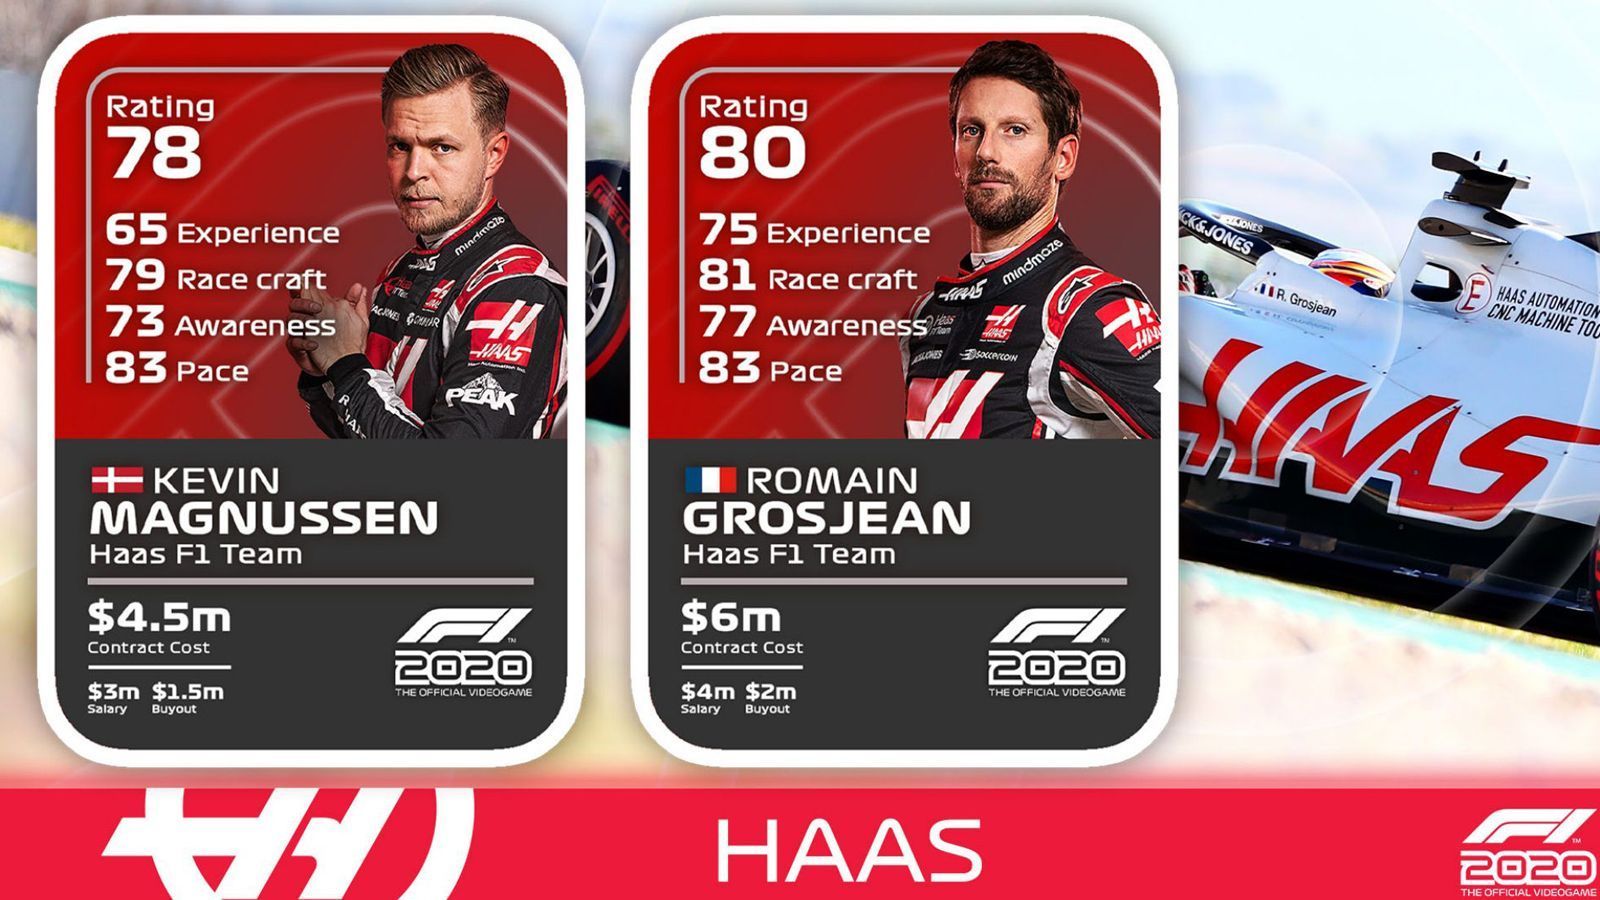 
                <strong>Haas</strong><br>
                Kevin Magnussen: Erfahrung 65, Fahrkunst 79, Bewusstsein 73, Pace 83, Overall Rating 78Romain Grosjean: Erfahrung 75, Fahrkunst 81, Bewusstsein 77, Pace 83, Overall Rating 80
              